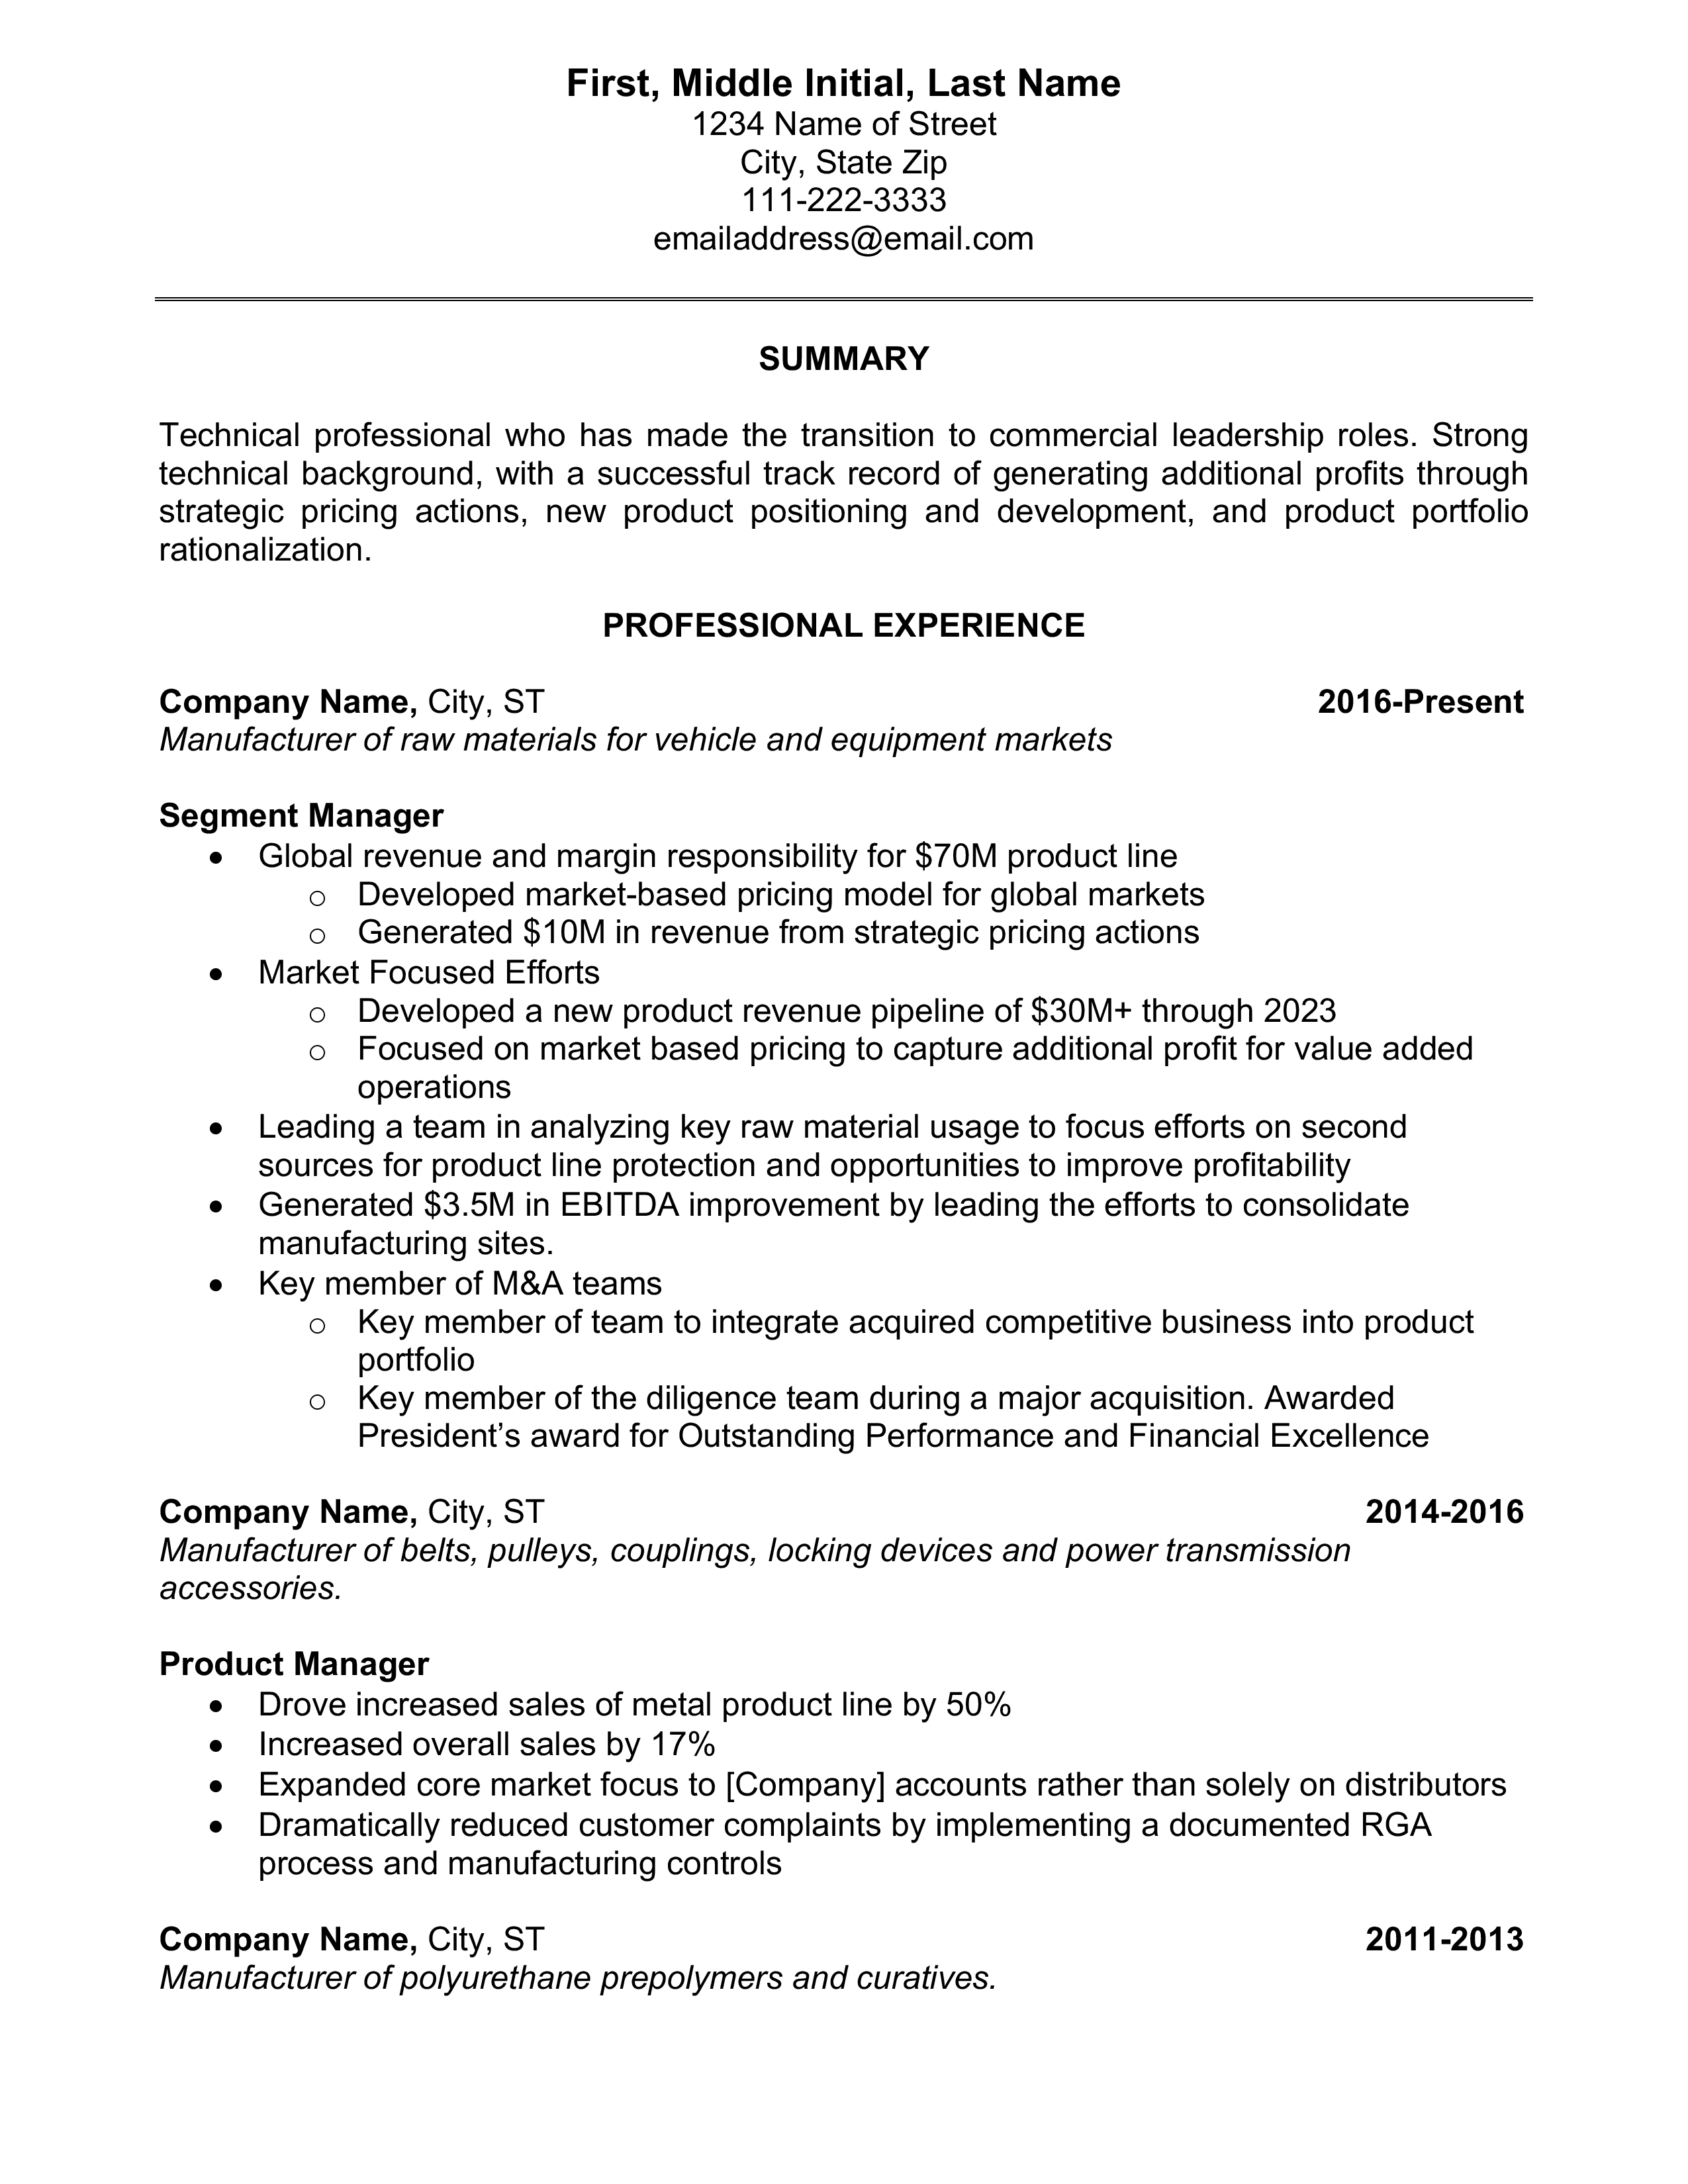 USA Resume Format: Best Tips and Examples (Updated)  ZipJob